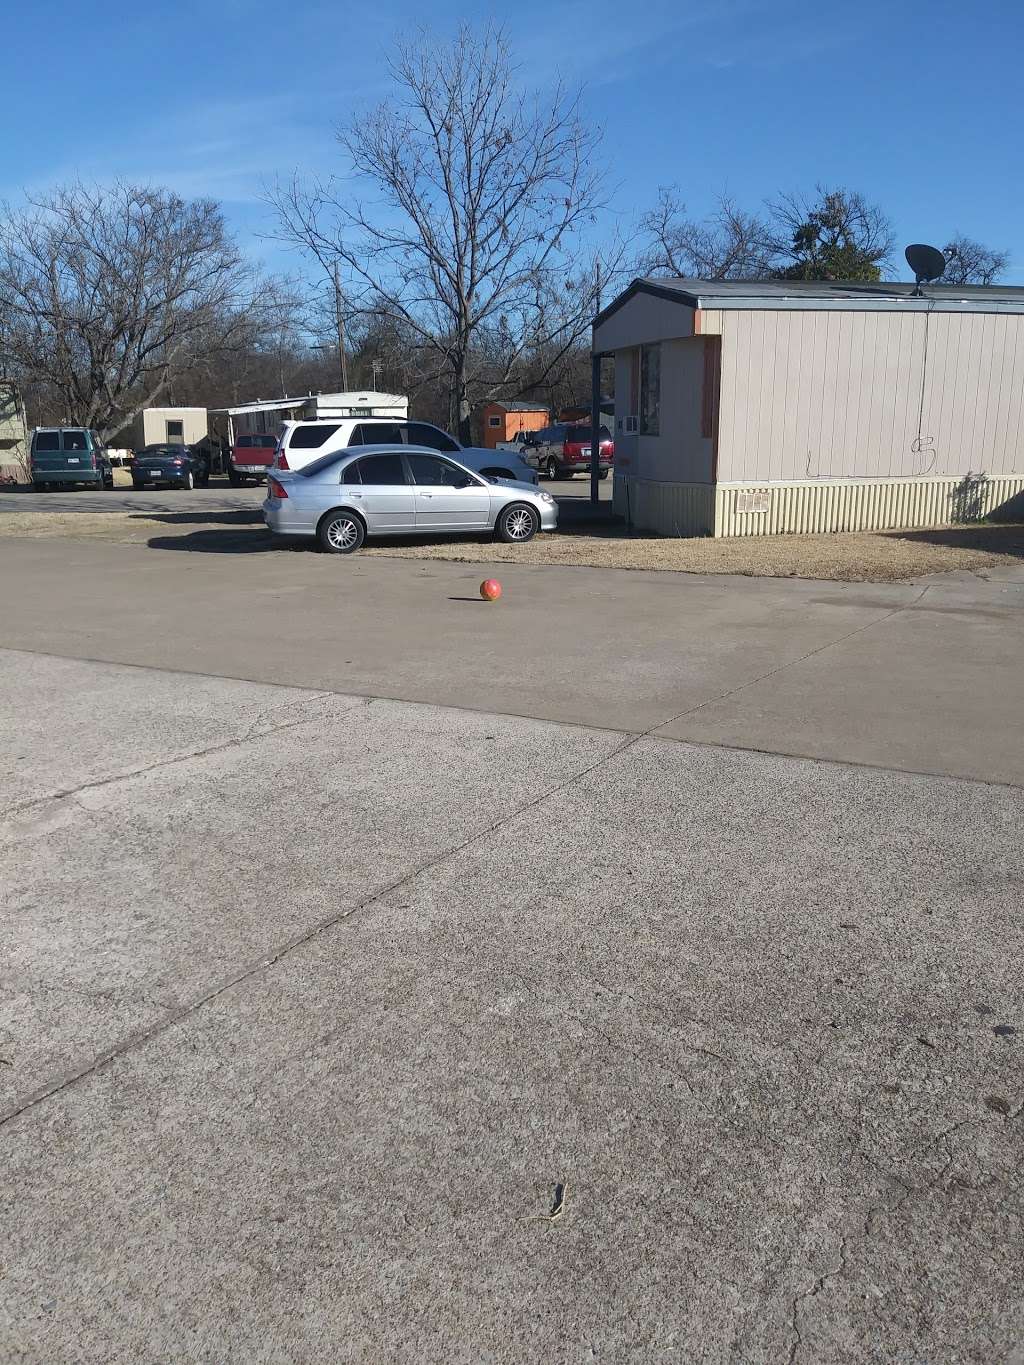 Wylie Propane & Mobile Home Park | Photo 2 of 10 | Address: 1001 S, TX-78, Wylie, TX 75098, USA | Phone: (972) 442-3798